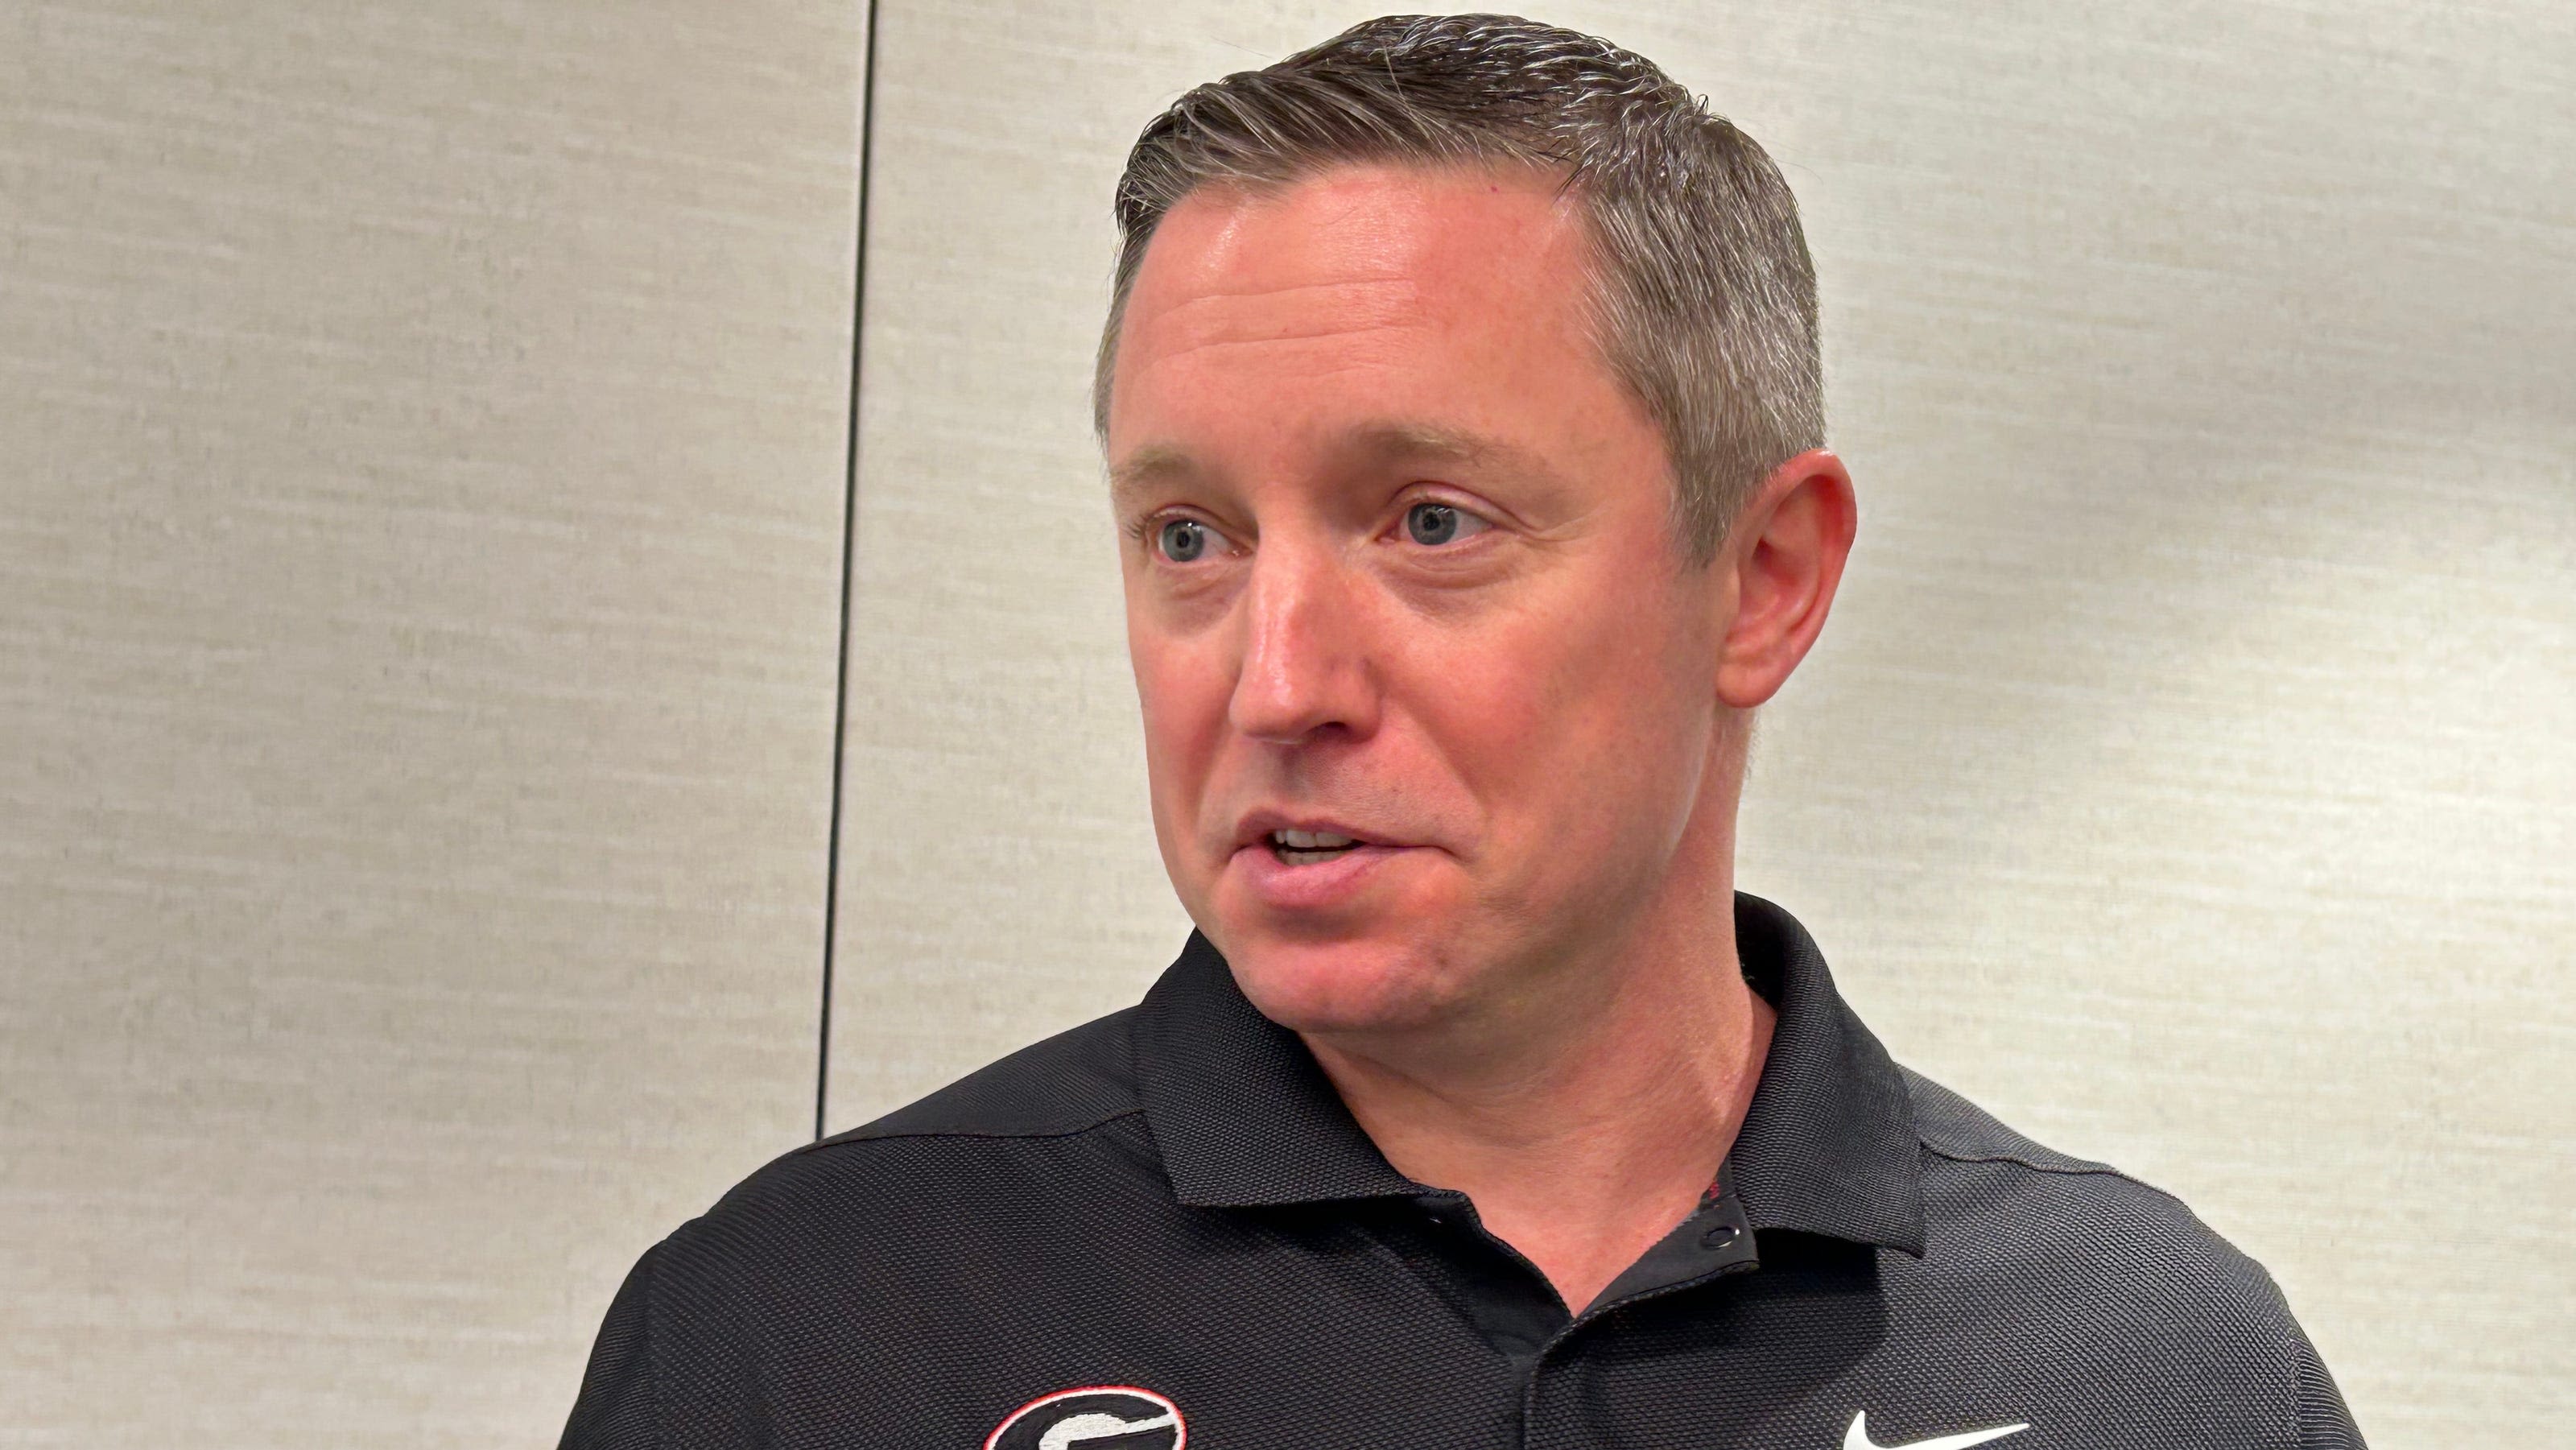 'I think we've got a chance to be very good.' Why Mike White likes Georgia basketball's roster